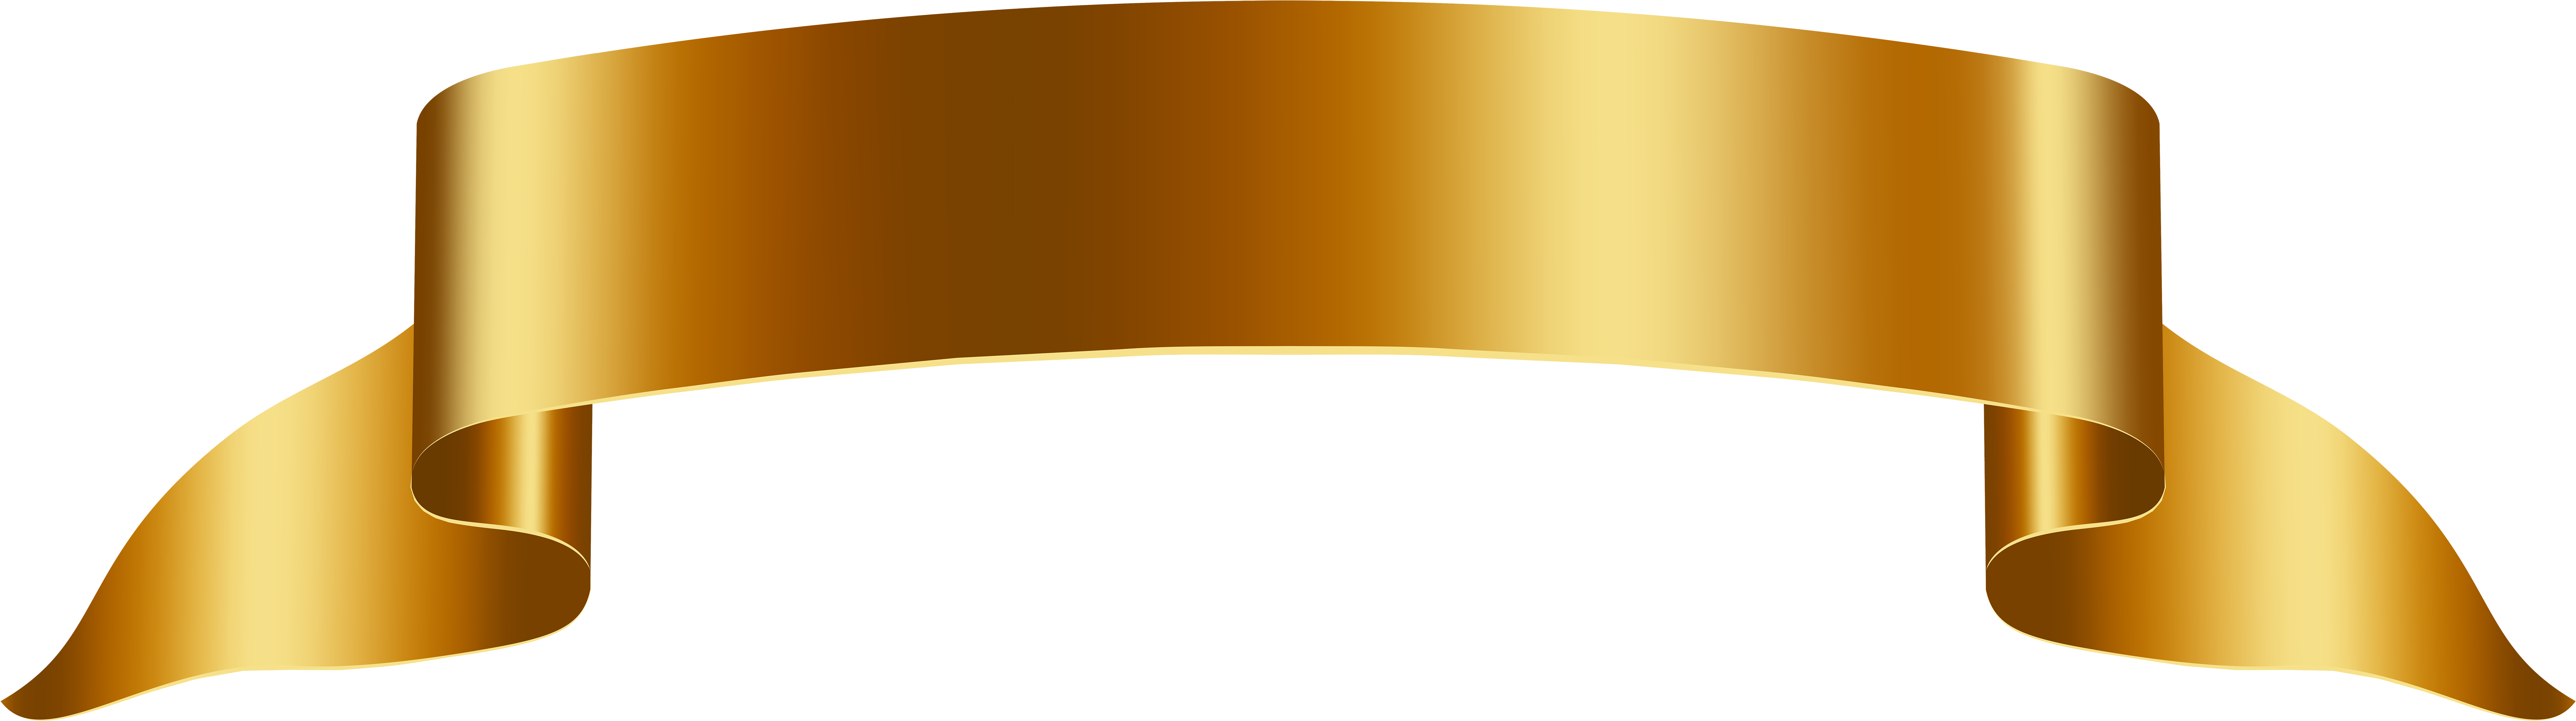 Gold Banner Png 7817 X 2187